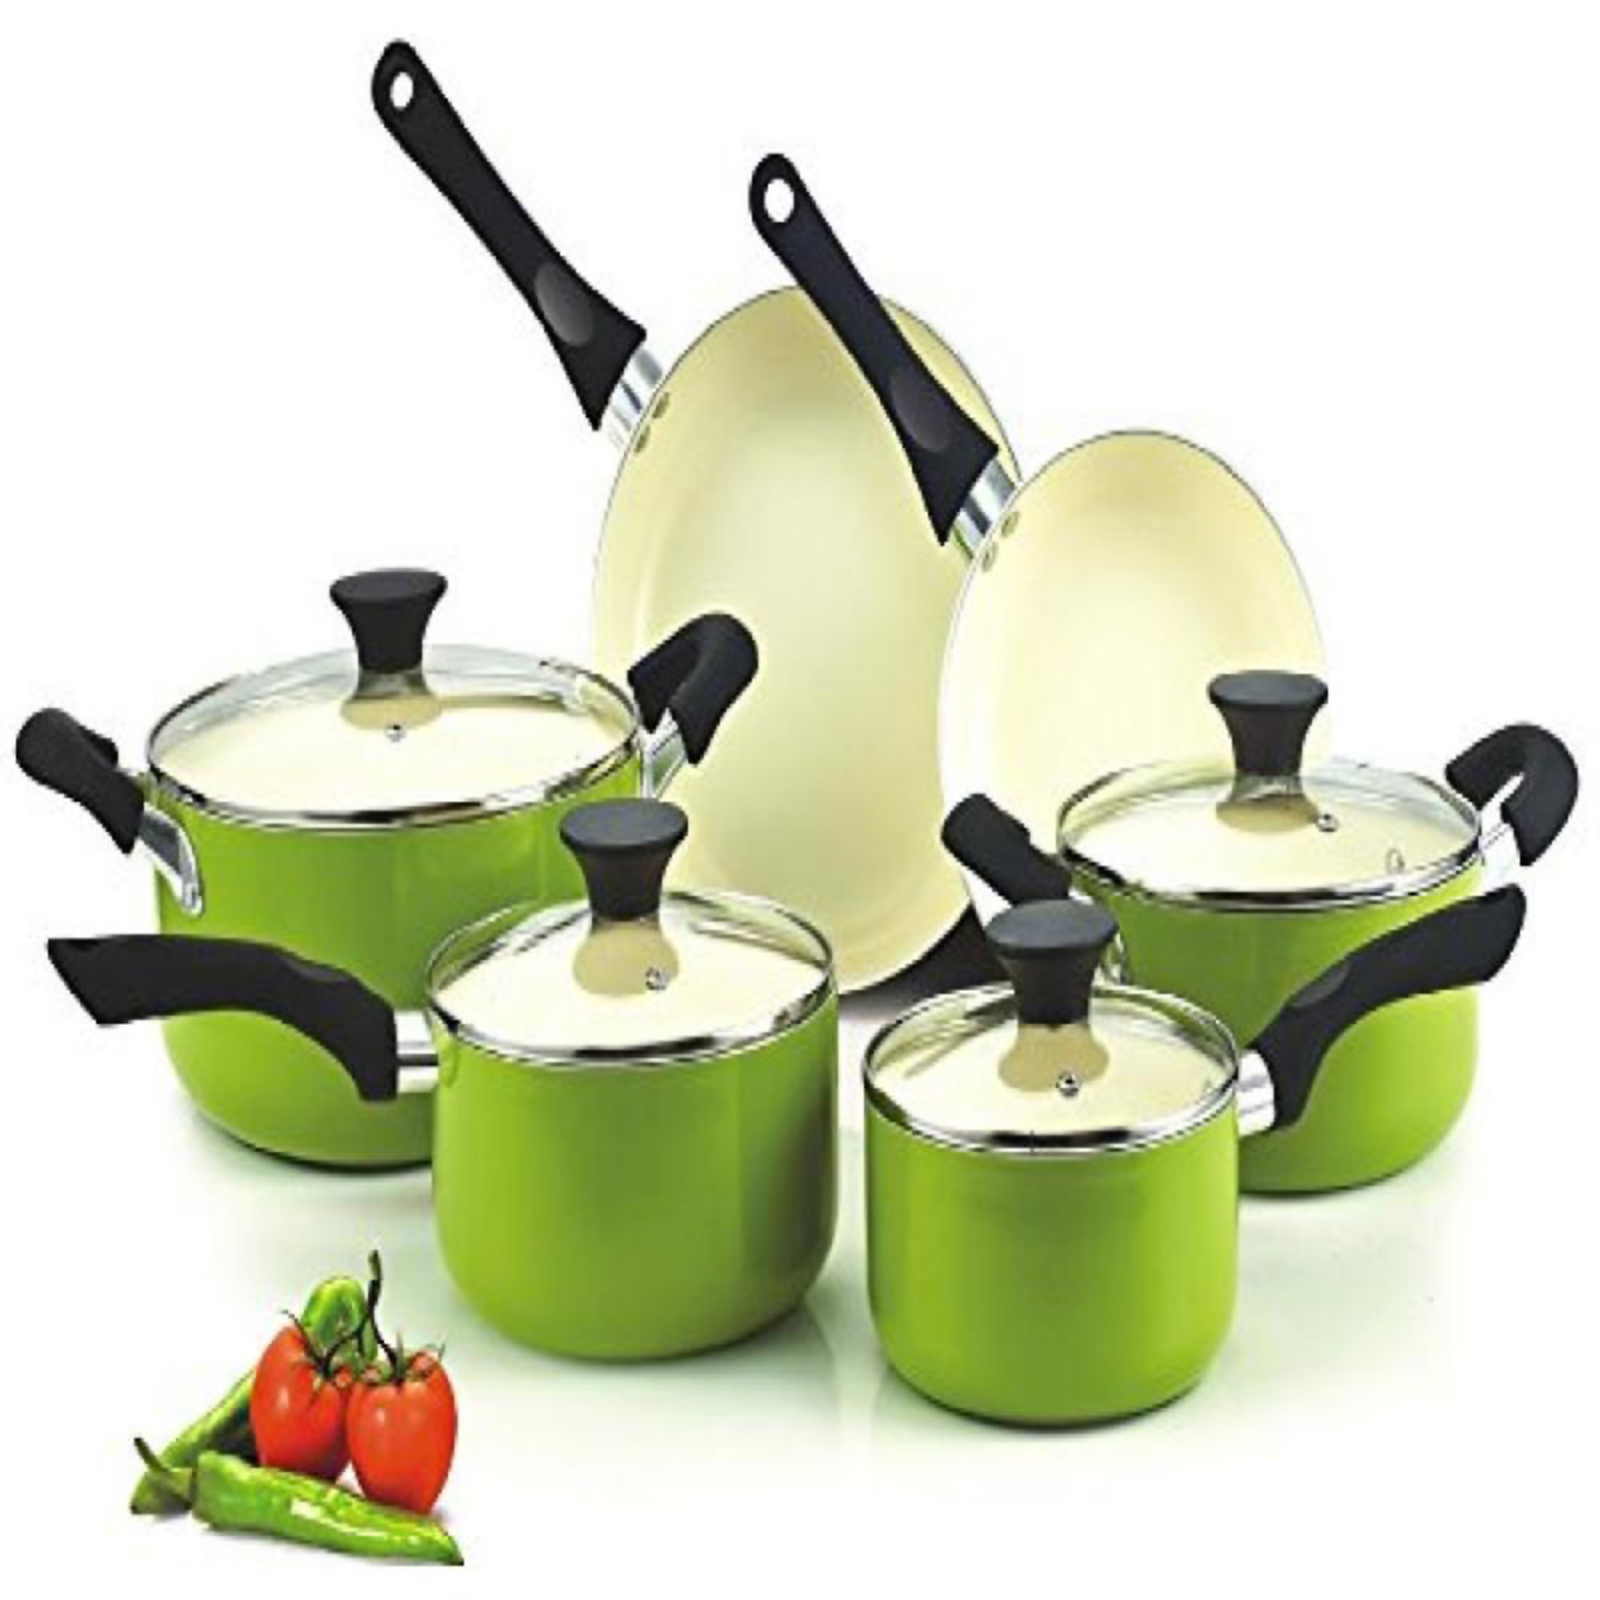 Cook N Home 10pc. Nonstick Ceramic Coating Cookware Set - Green